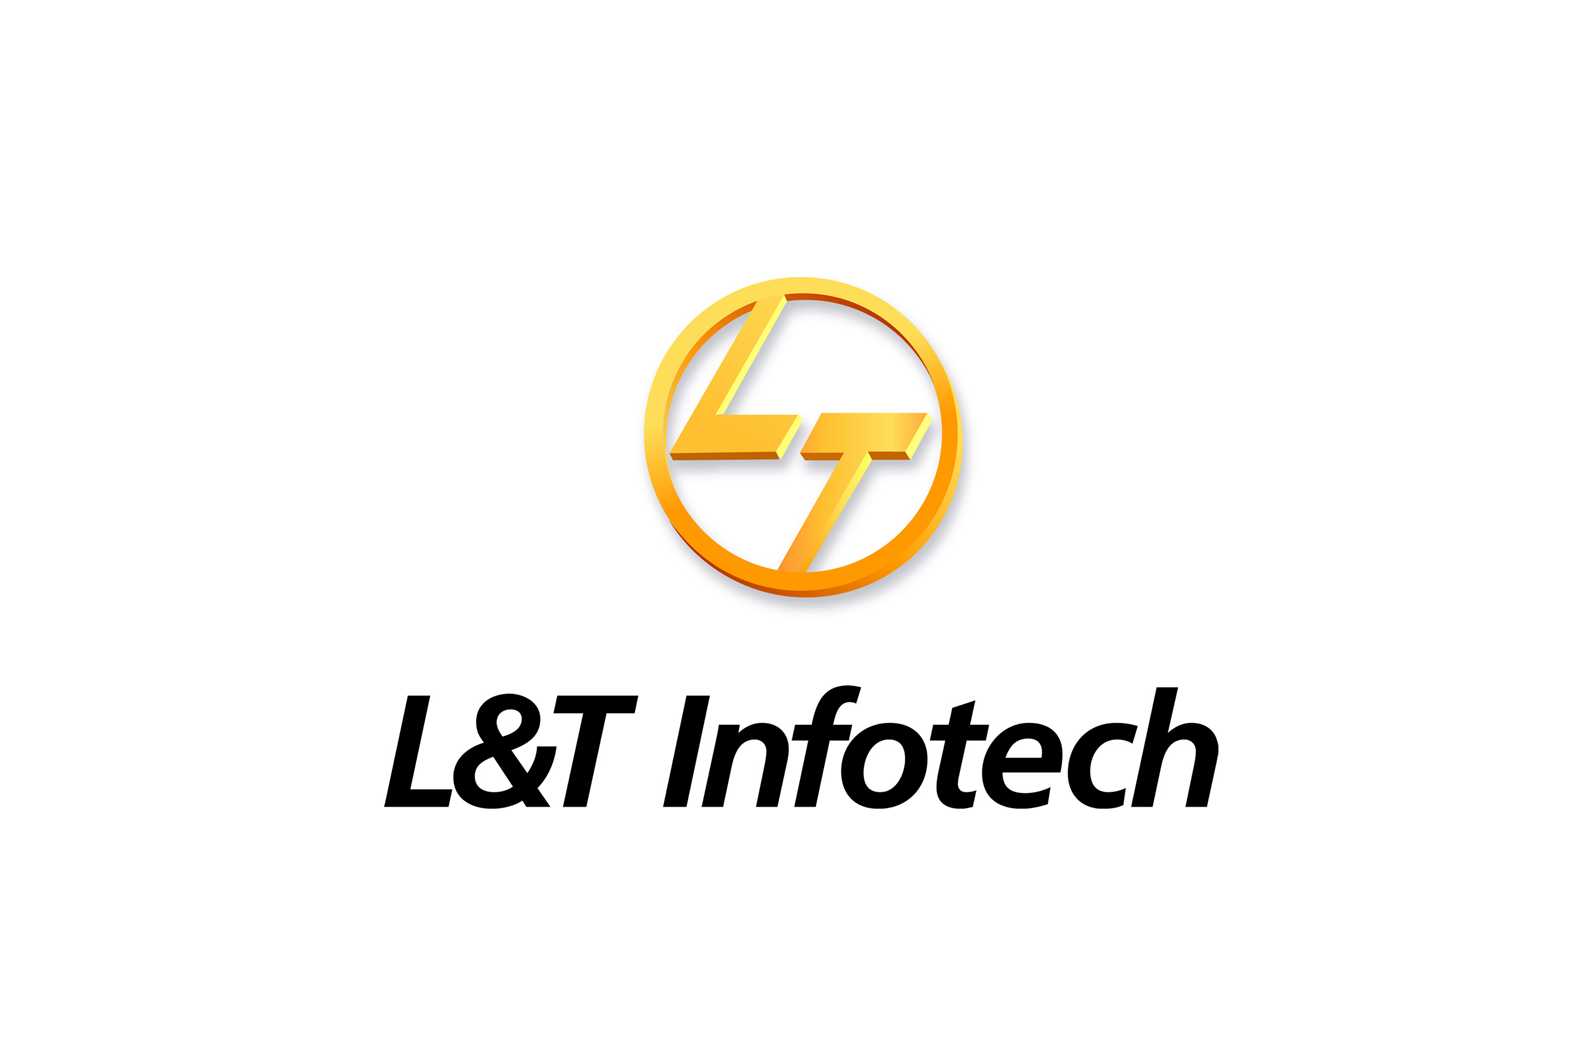 L & T InfoTech OffCampus Drive for BE, B.Tech, MCA, ME, M.Tech & Other